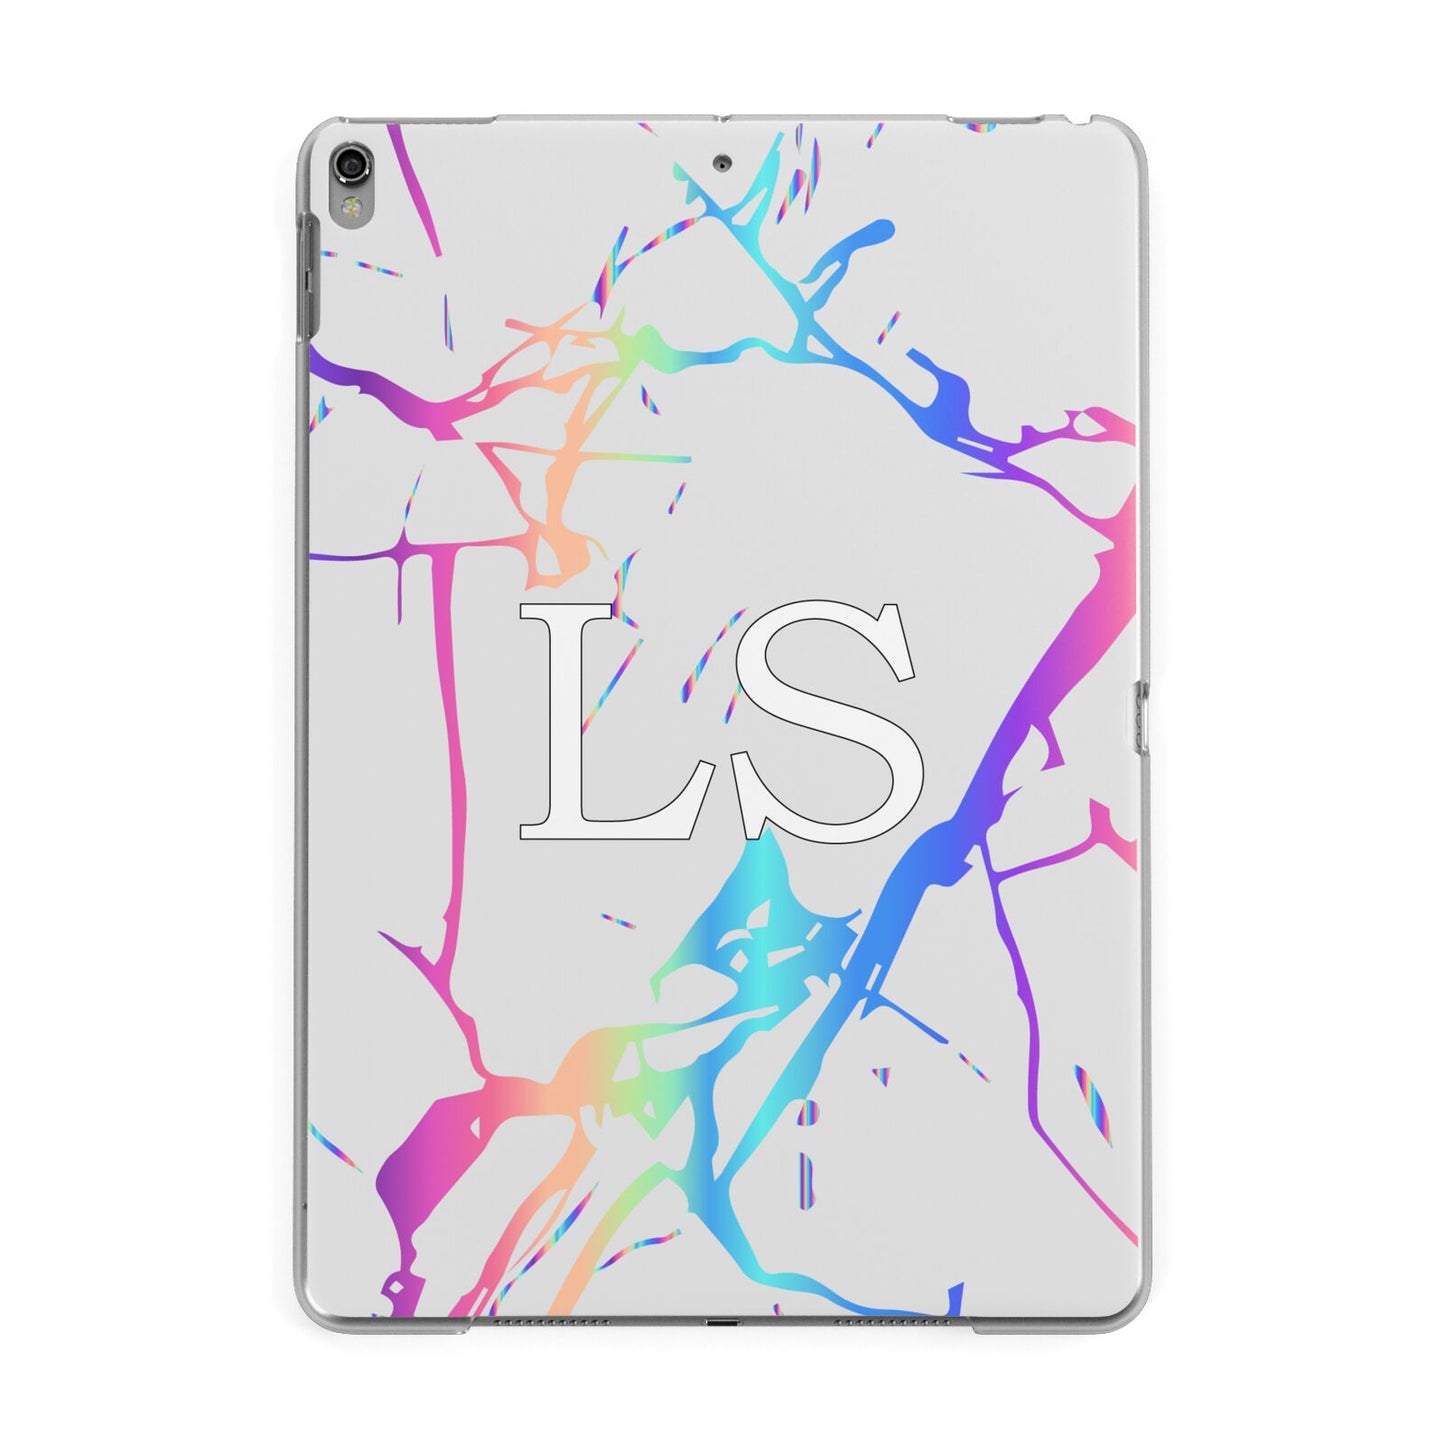 Personalised White Holographic Marble Initials Apple iPad Grey Case